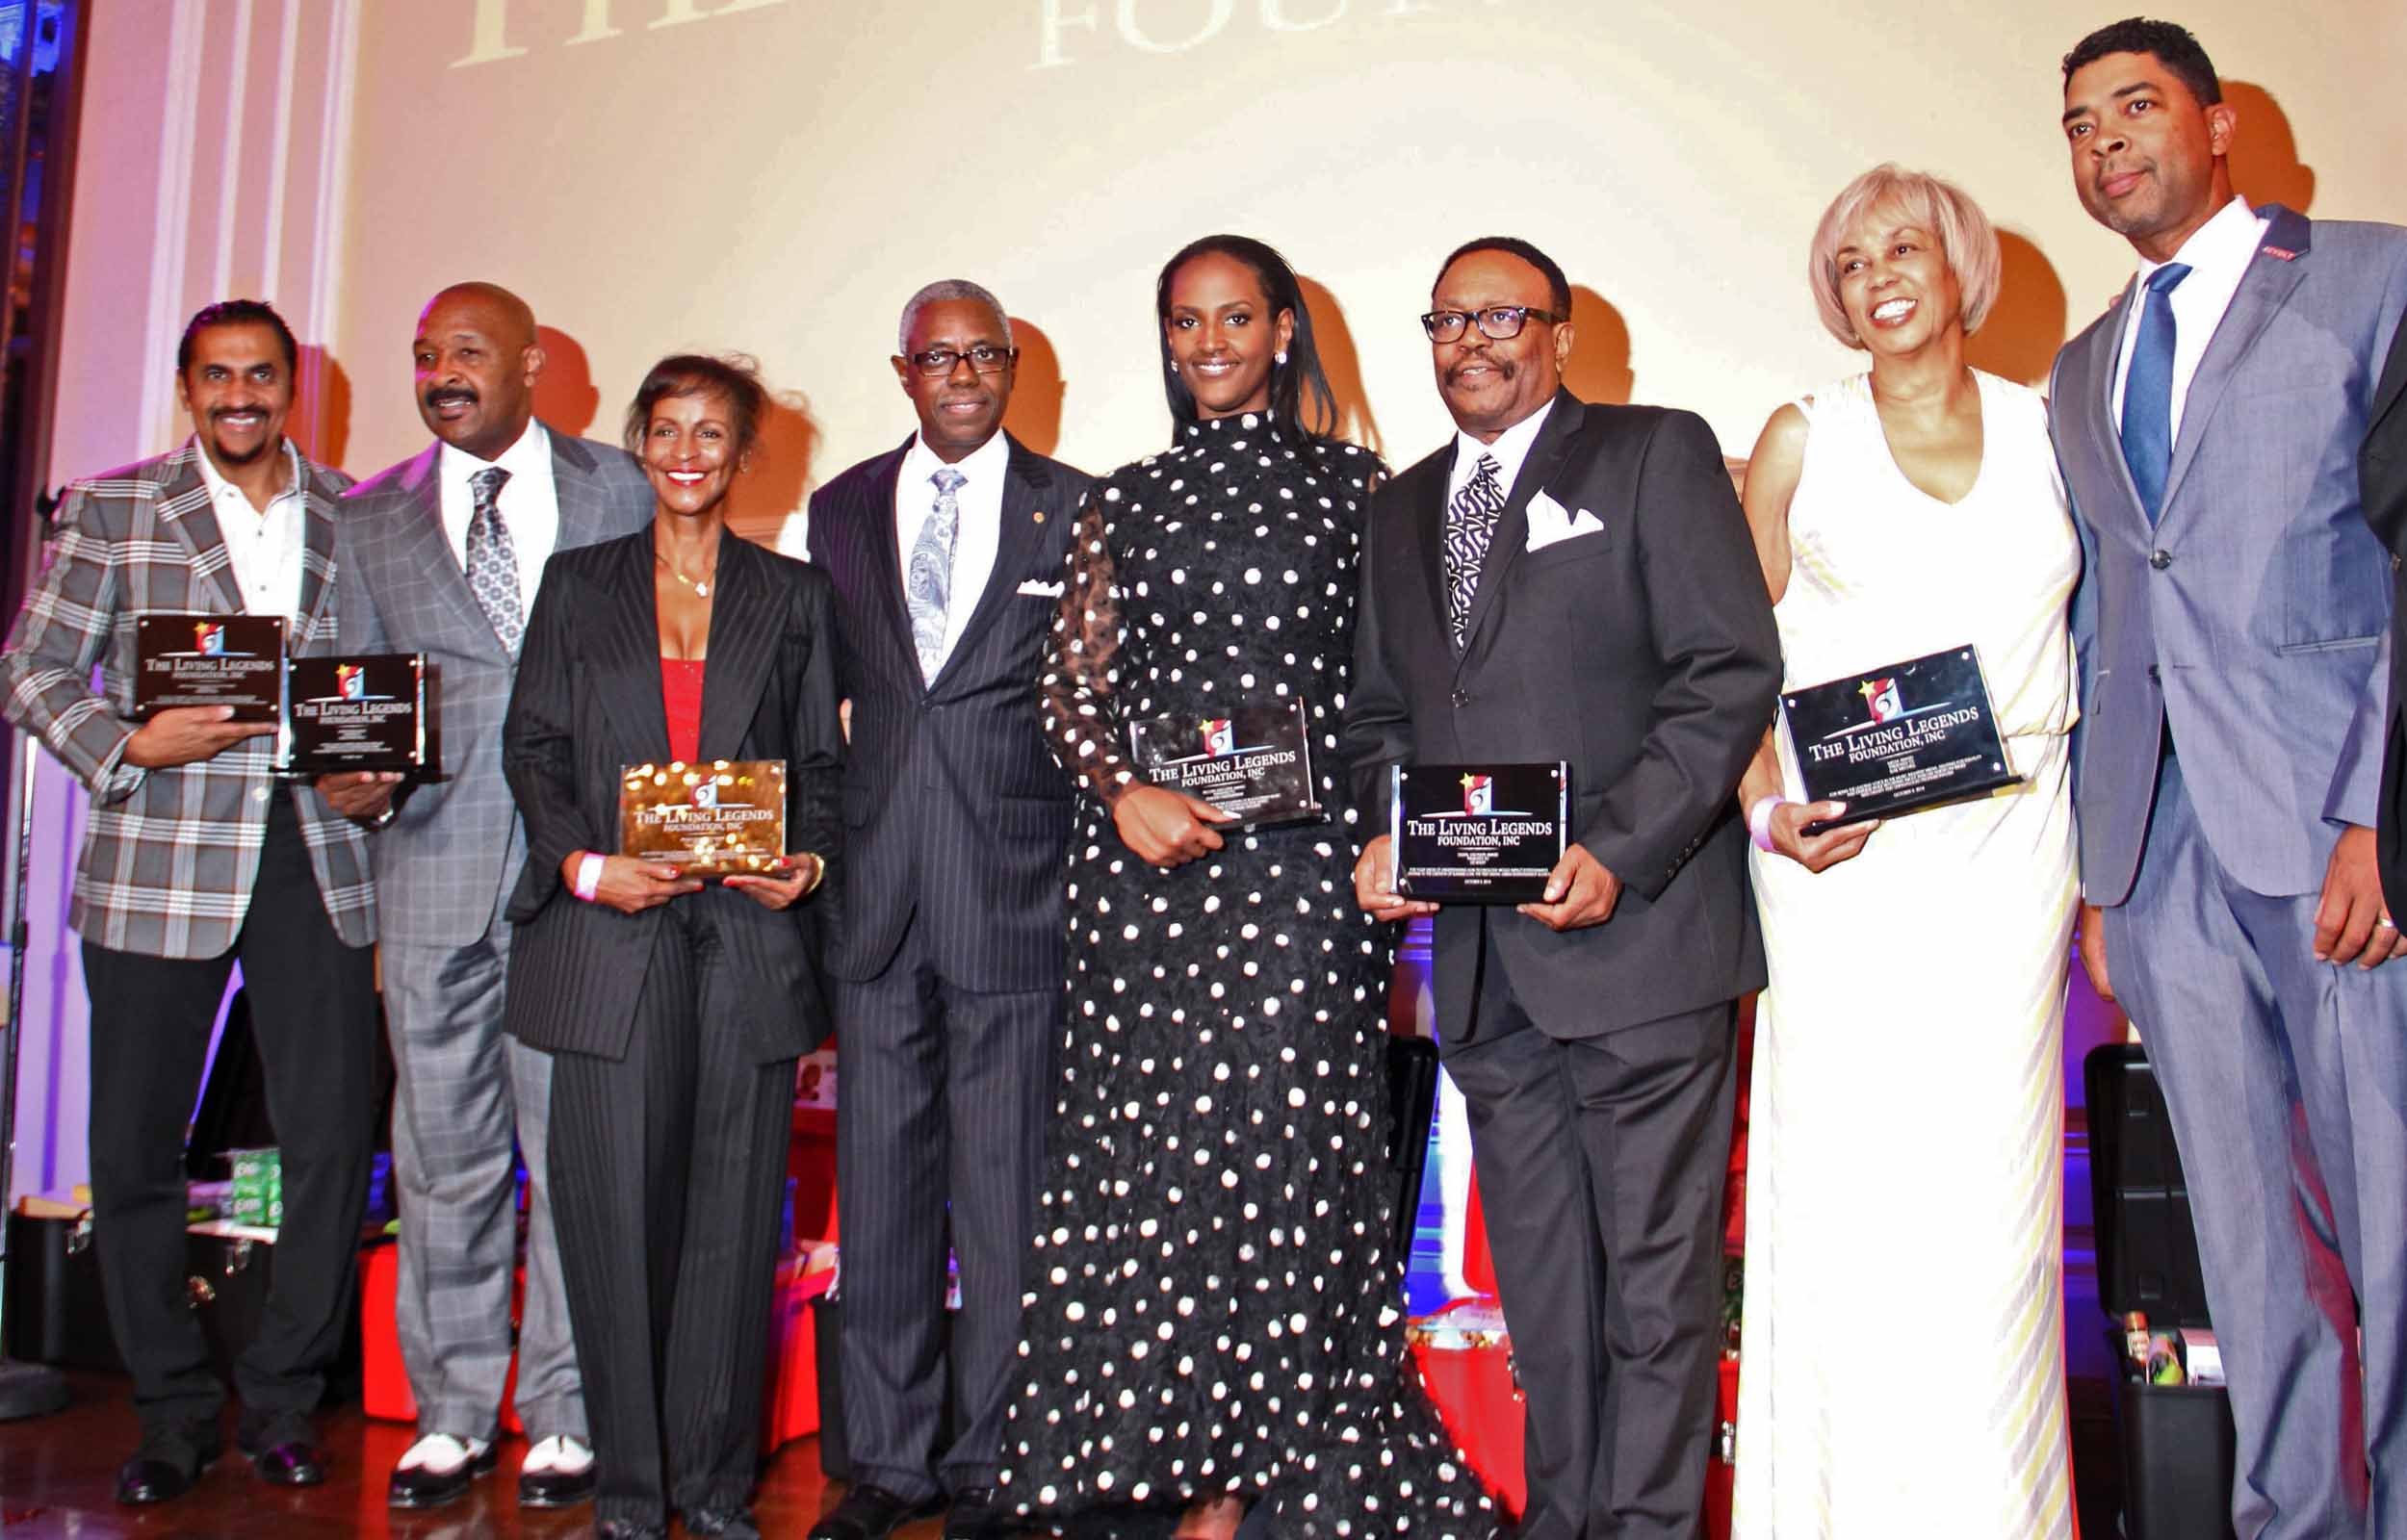 The 2014 Living Legends Foundation honorees